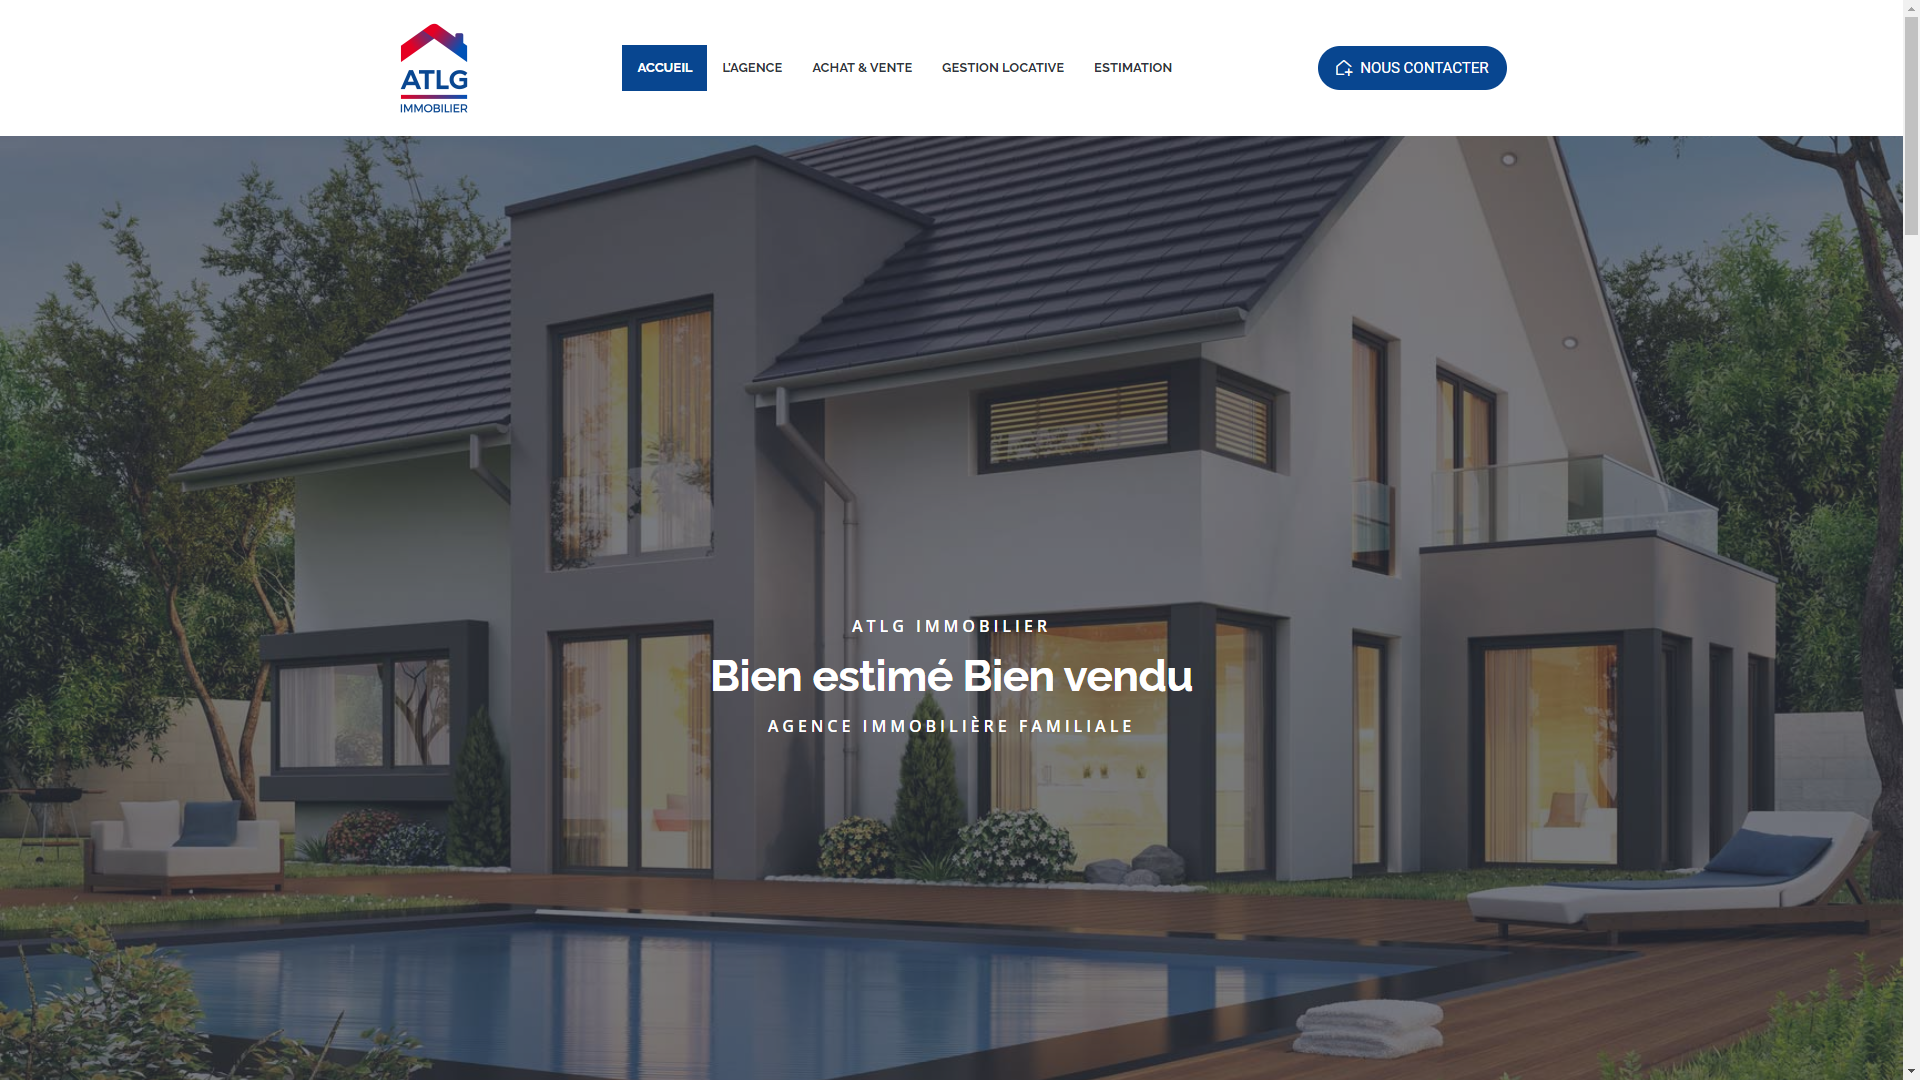 ATLG Immobilier